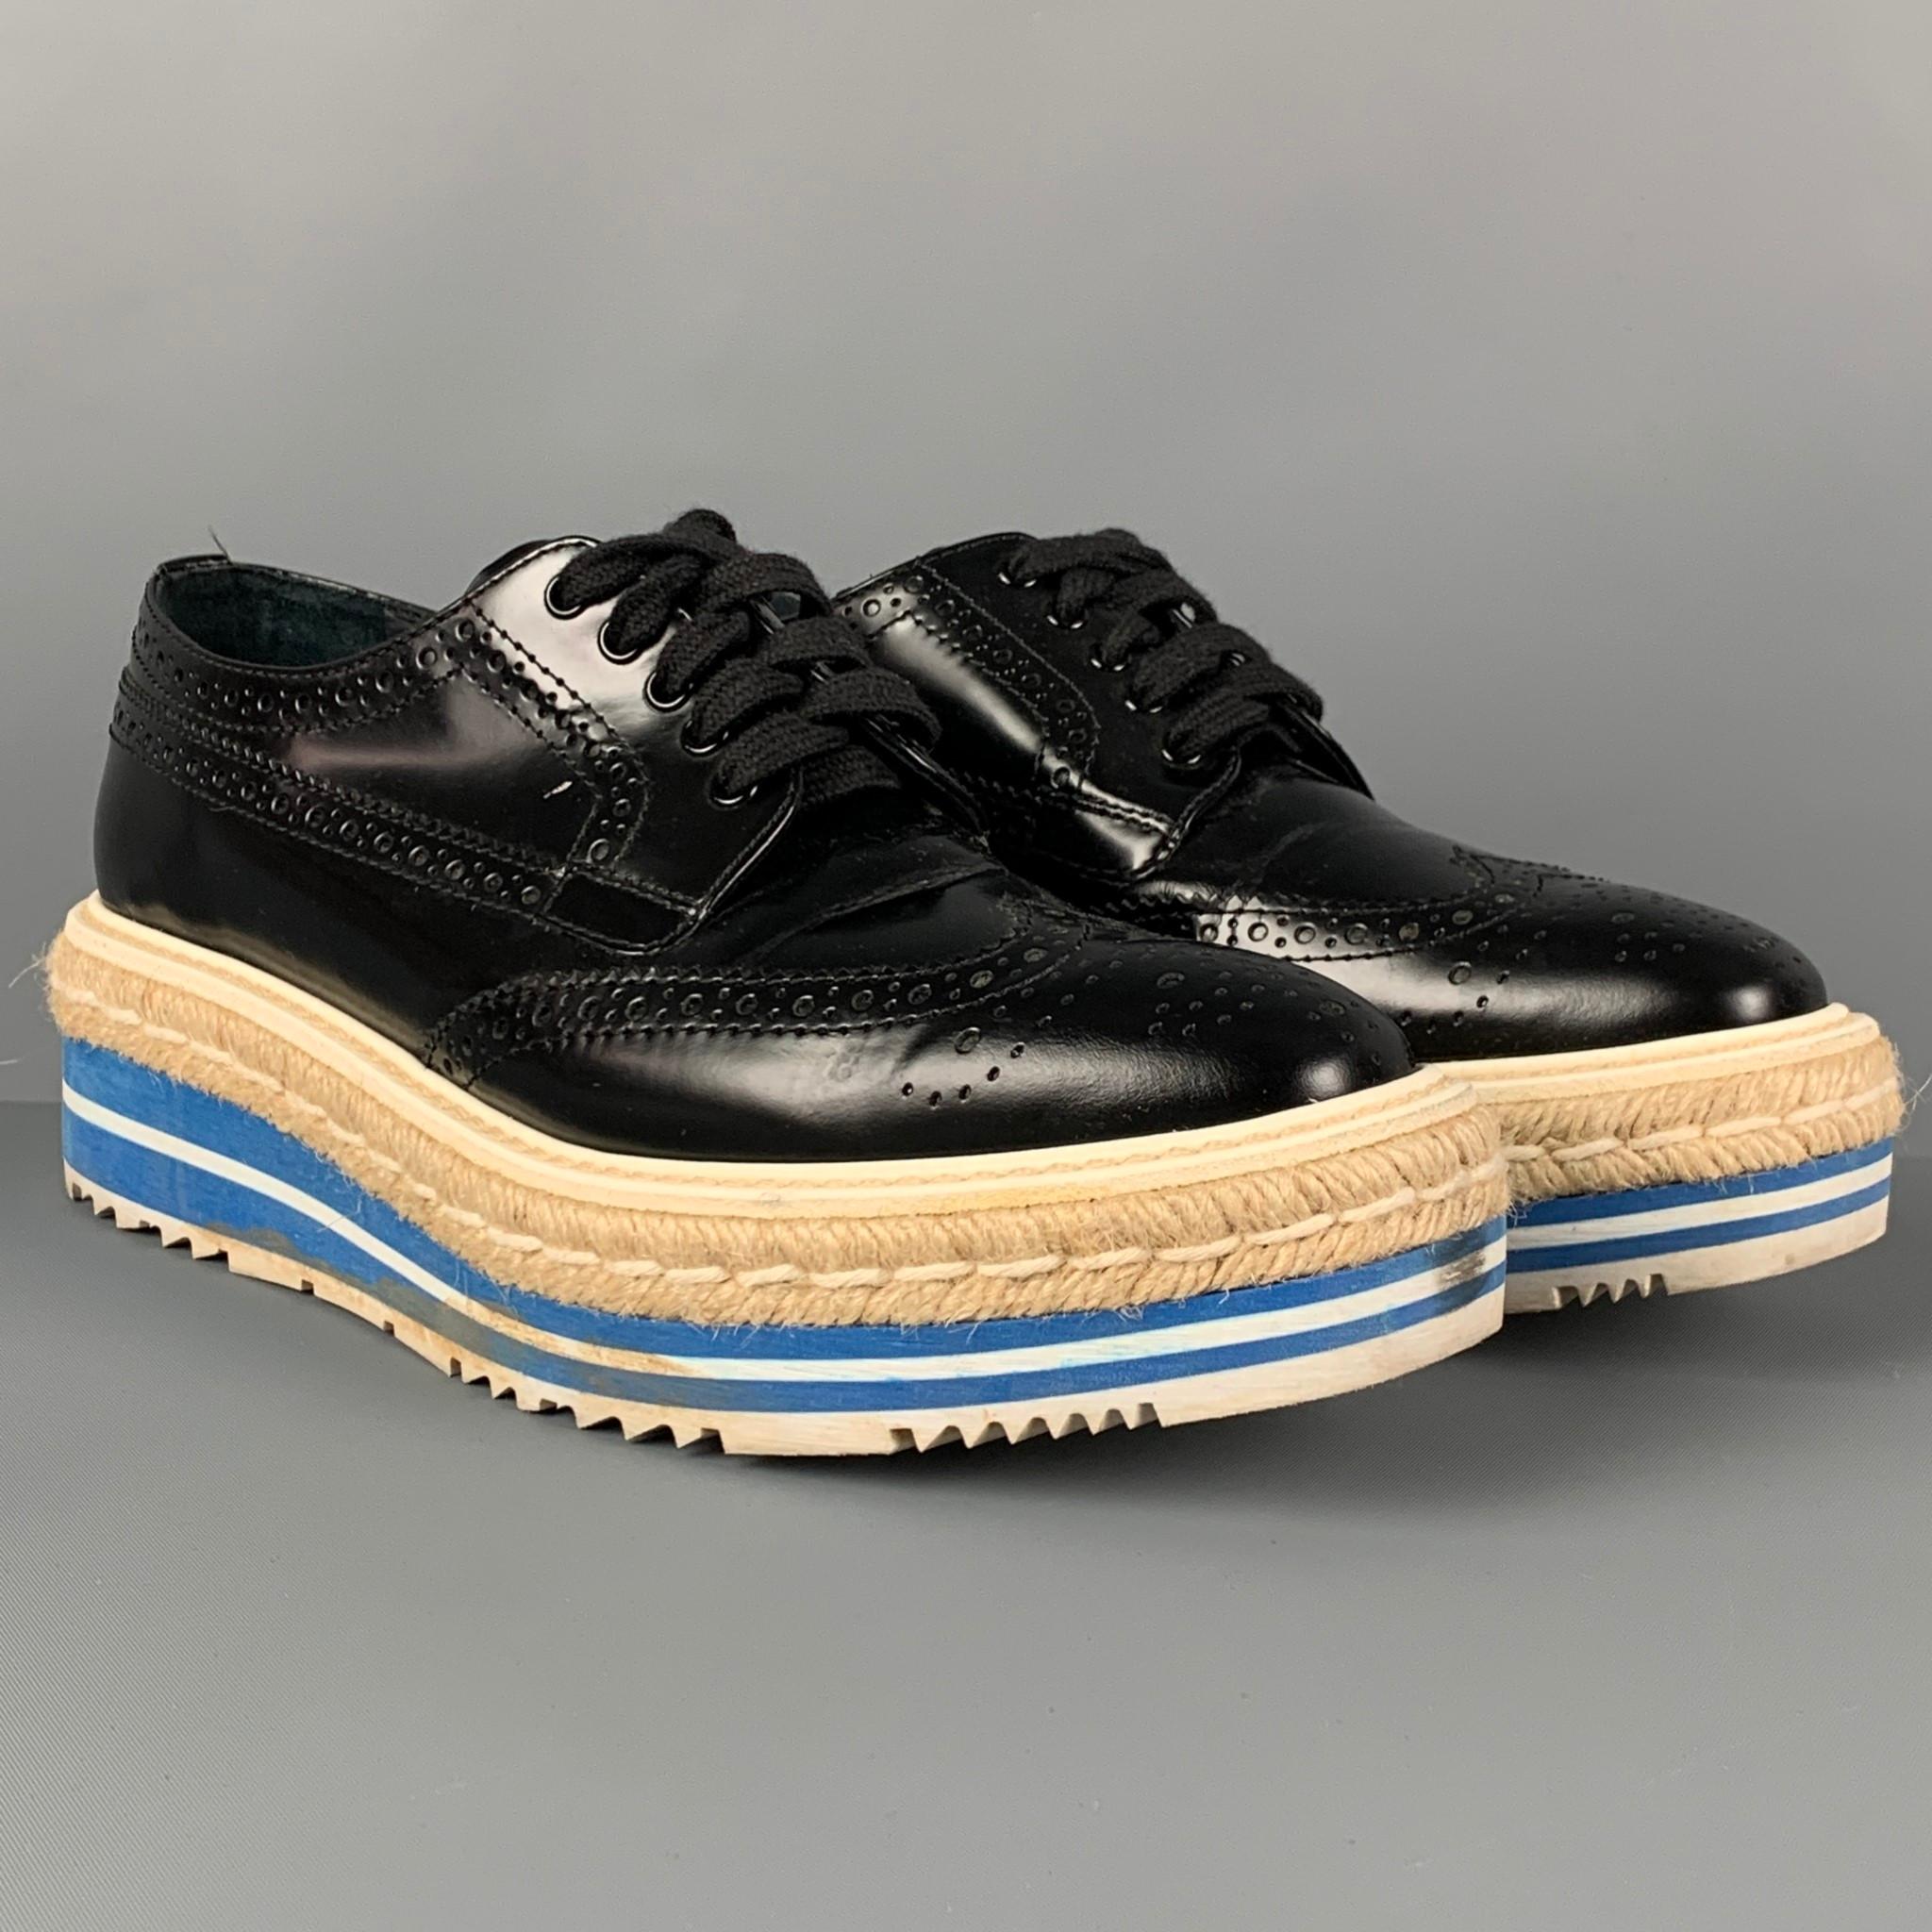 PRADA shoes comes in a black perforated leather featuring a wingtip style, square toe, and a jute trim platform sole. Made in Italy. 

Very Good Pre-Owned Condition.
Marked: 36.5

Outsole: 10.5 in. x 3.5 in. 